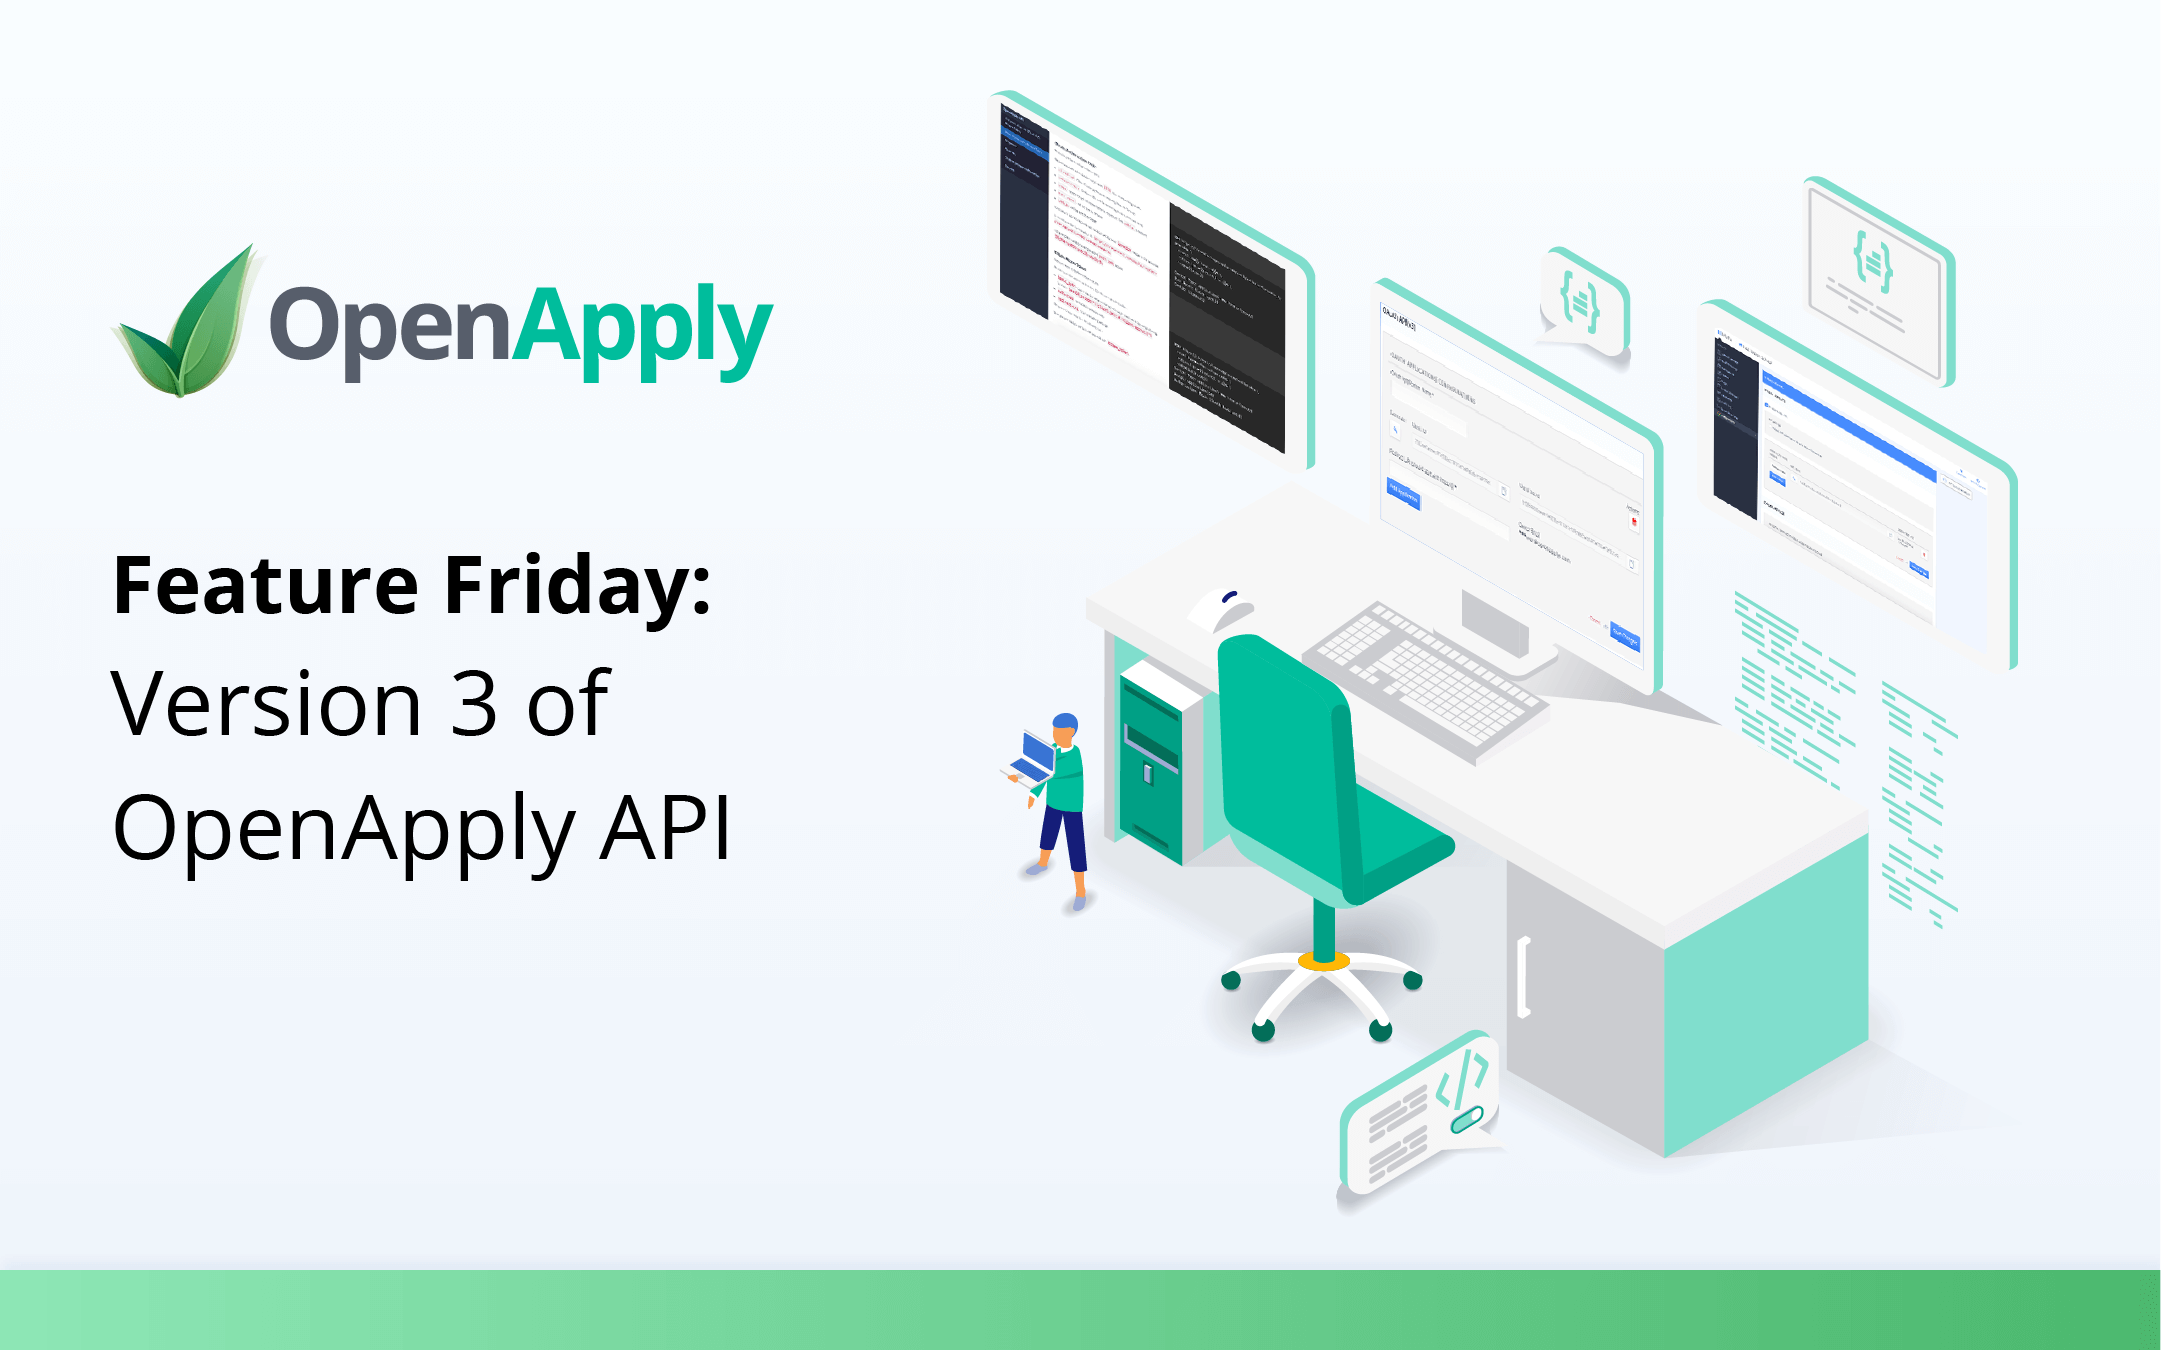 Feature Friday: Version 3 of OpenApply API